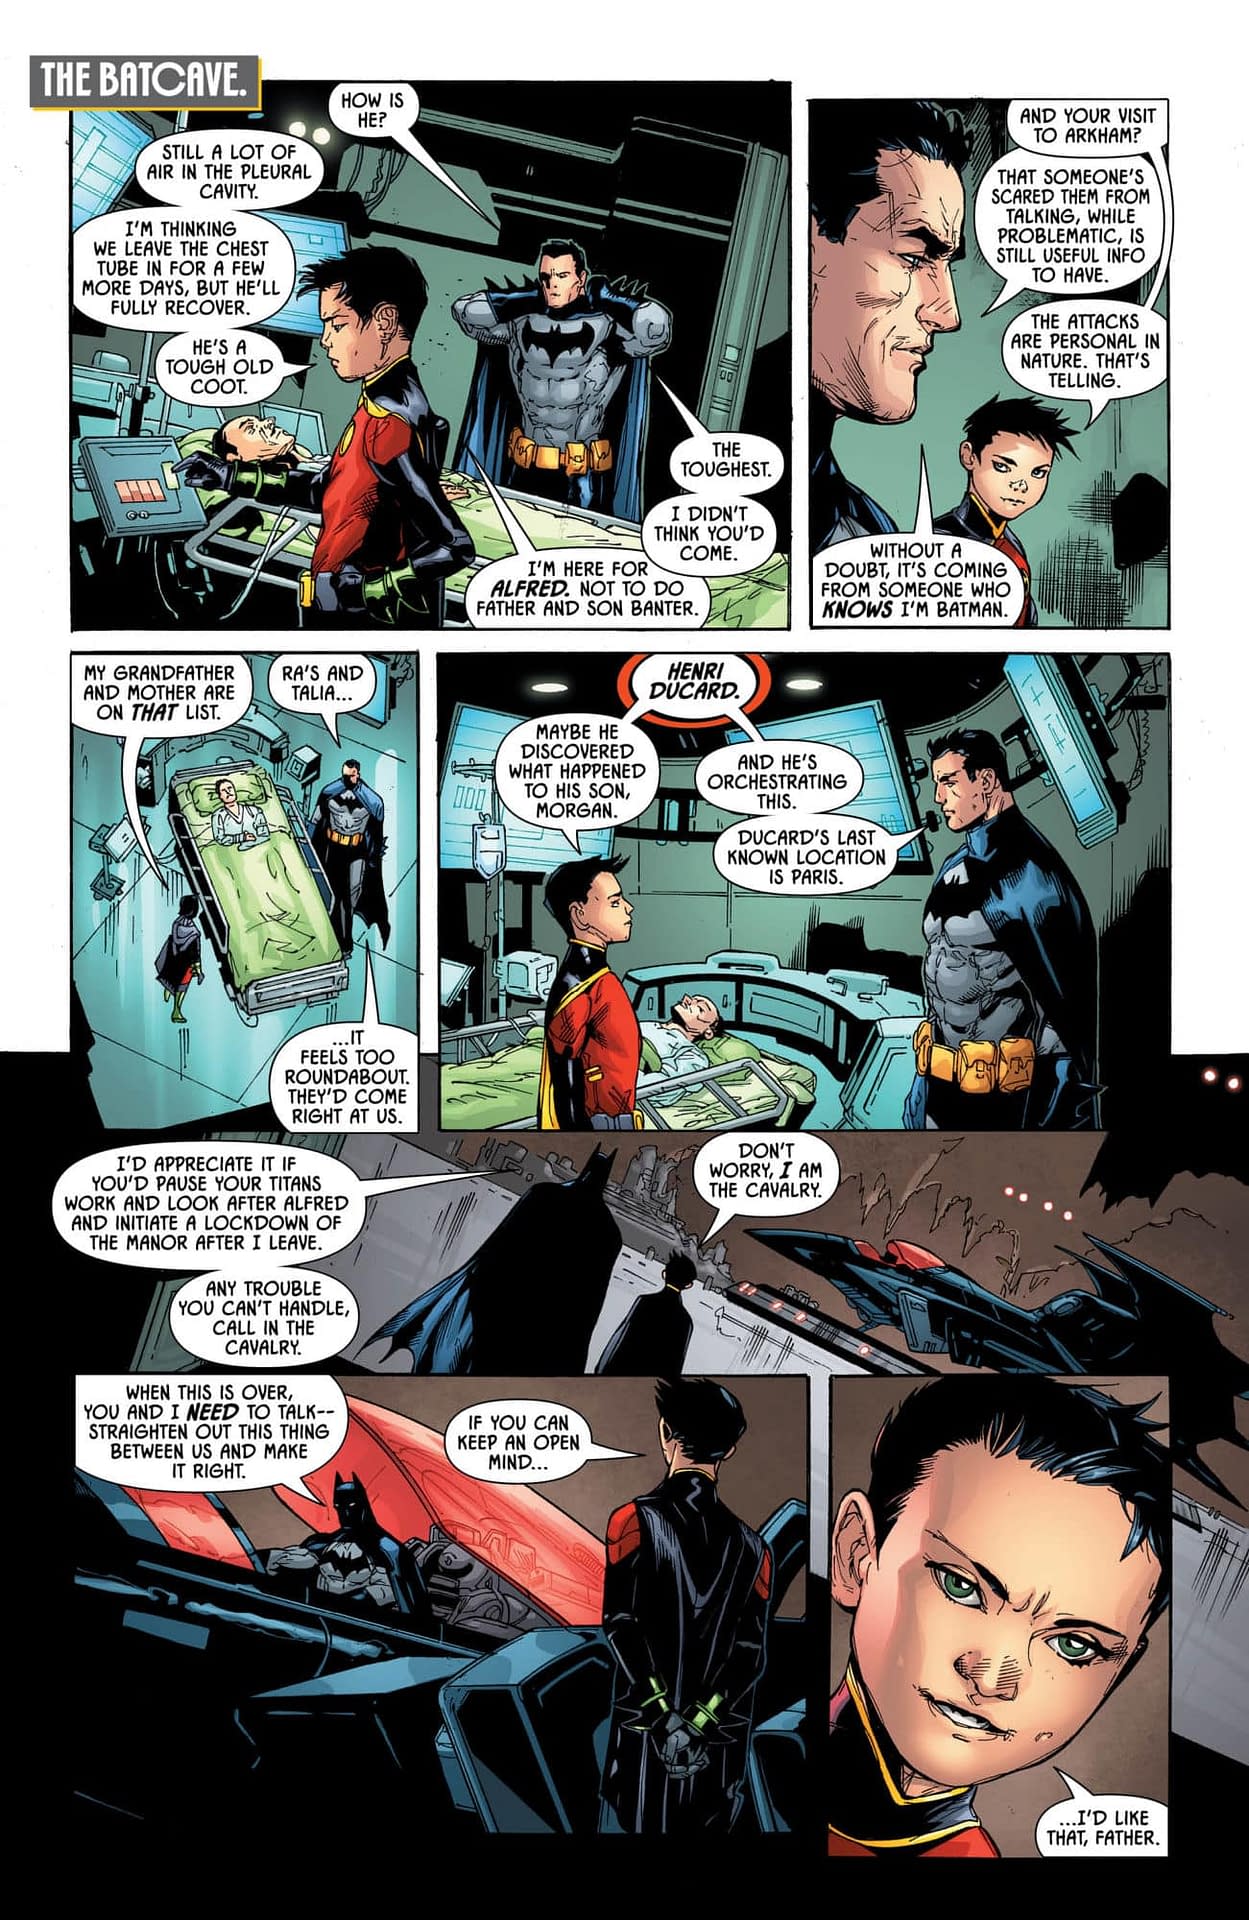 When in Doubt, Blame the French &#8211; a Detective Comics #996 Preview